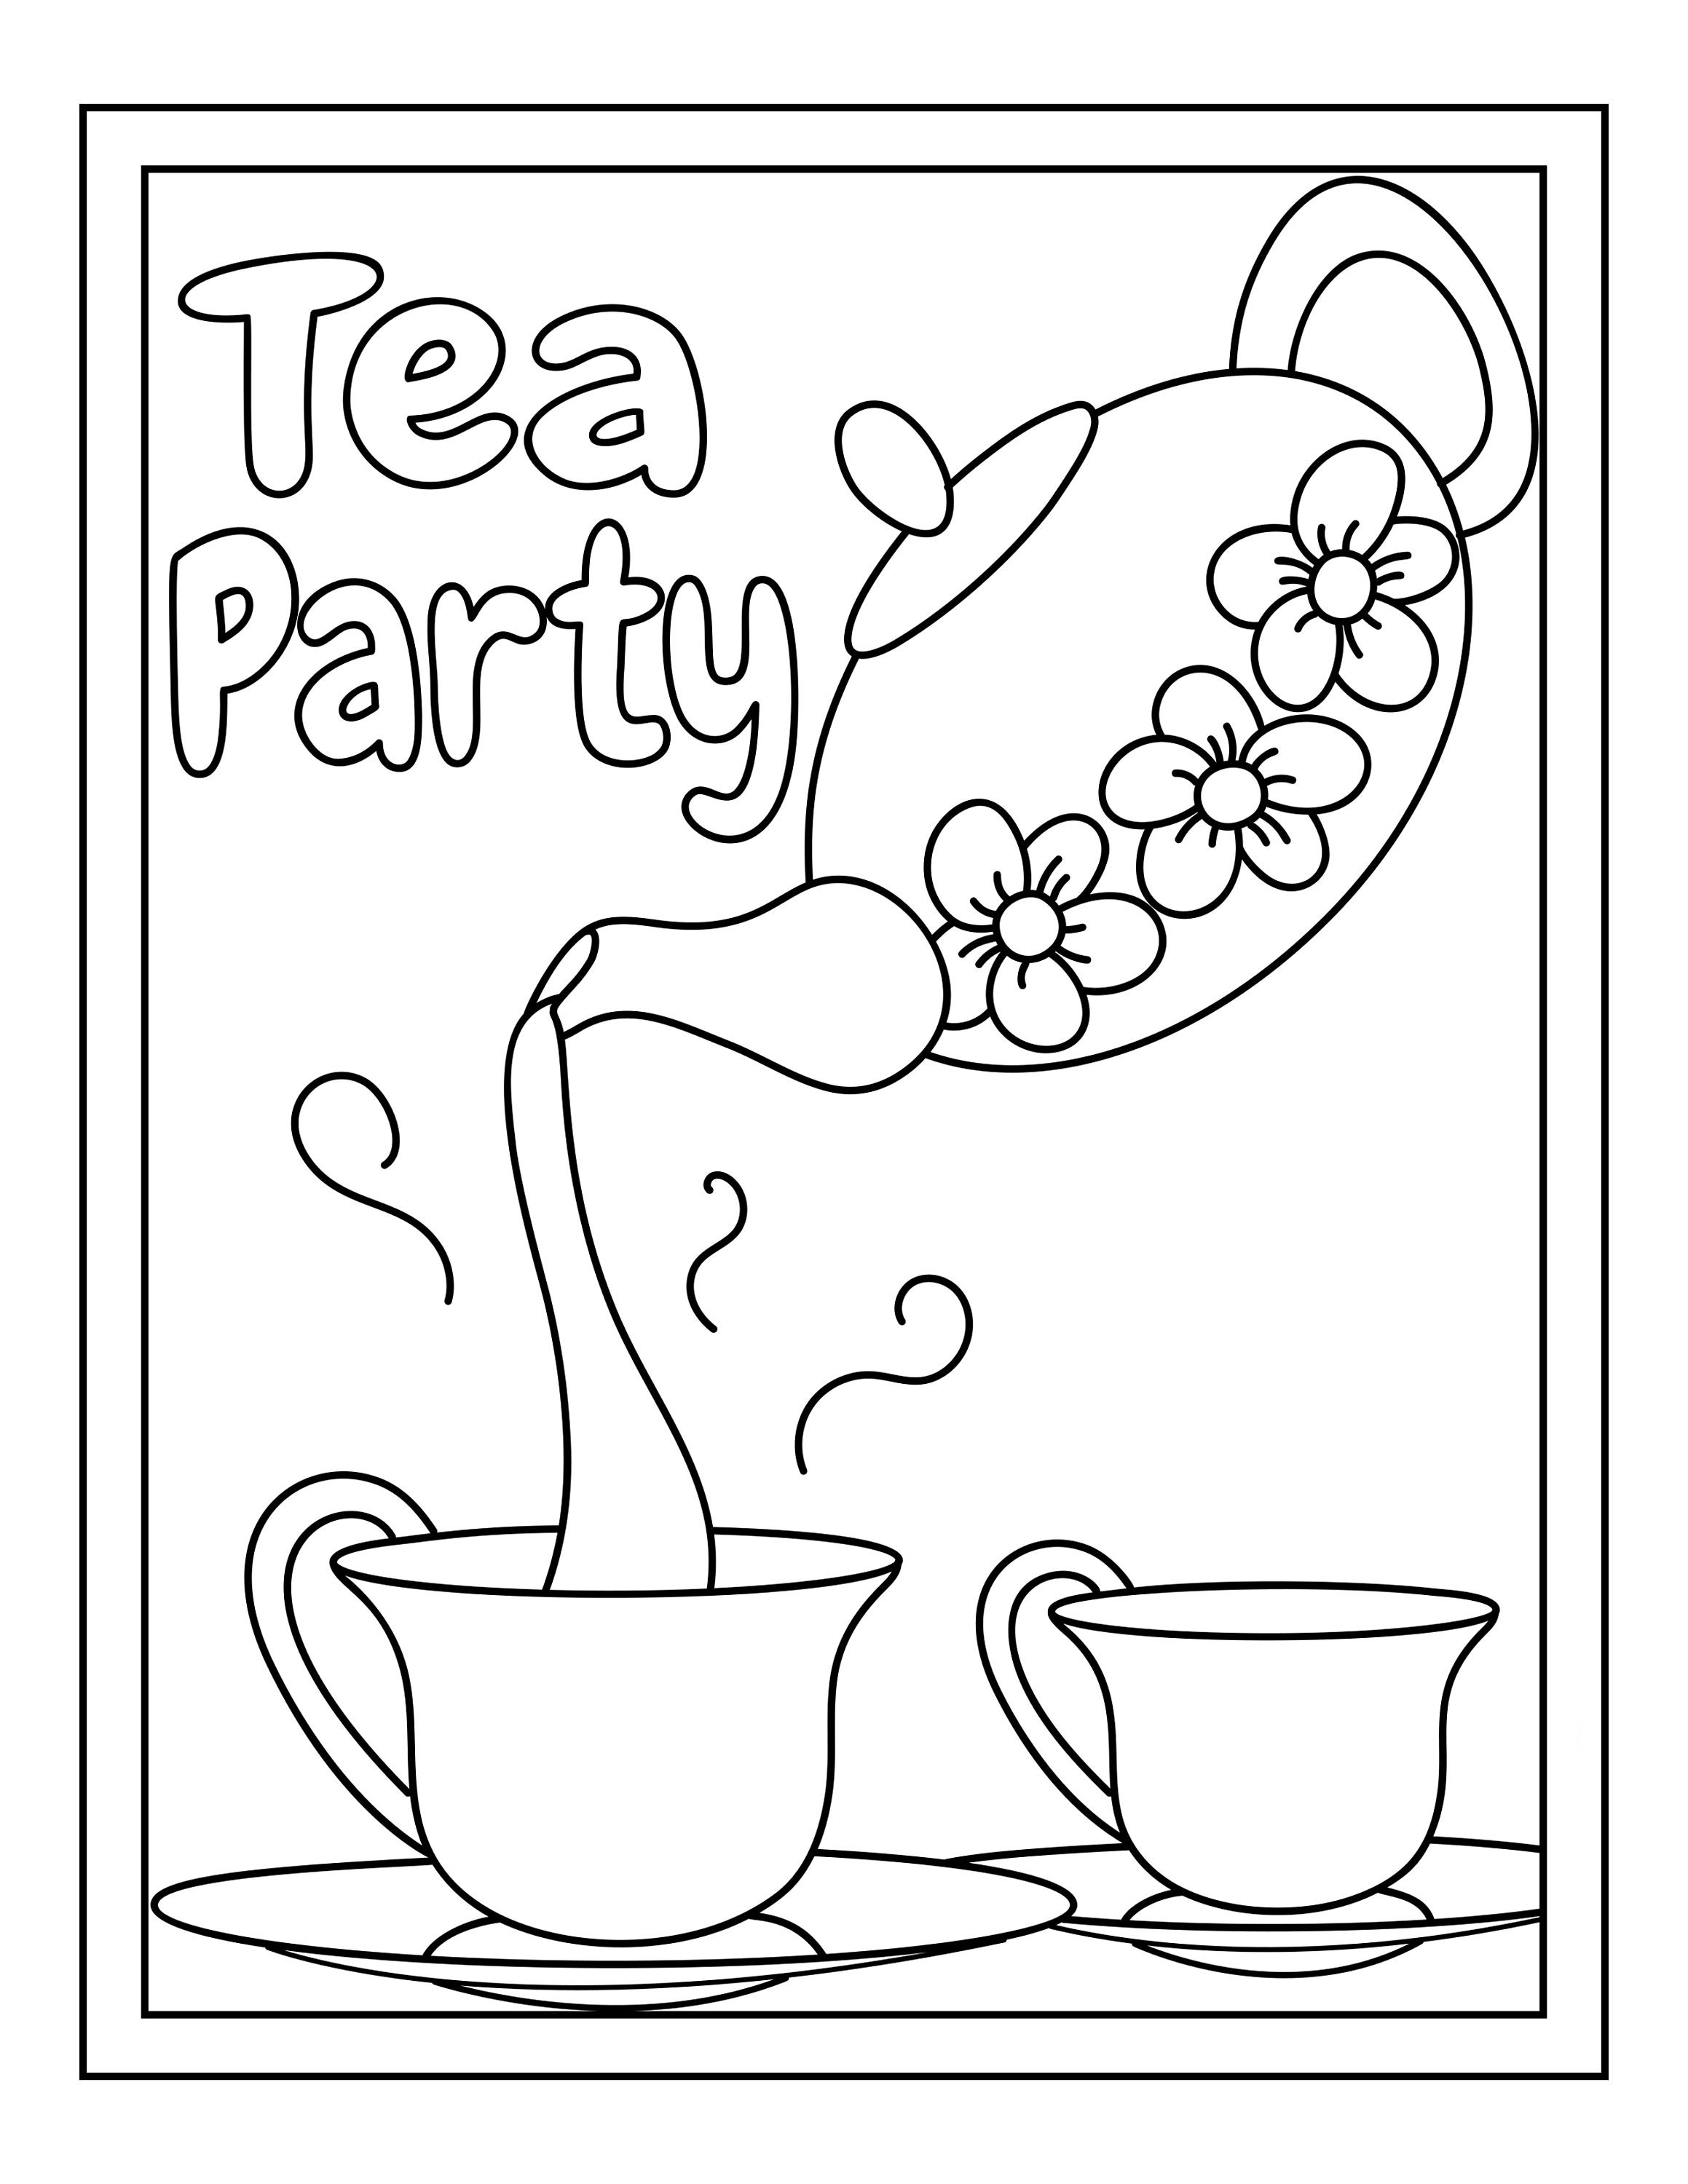 Printable Tea Party Coloring Page Coolest Free Printables Pattern | My ...